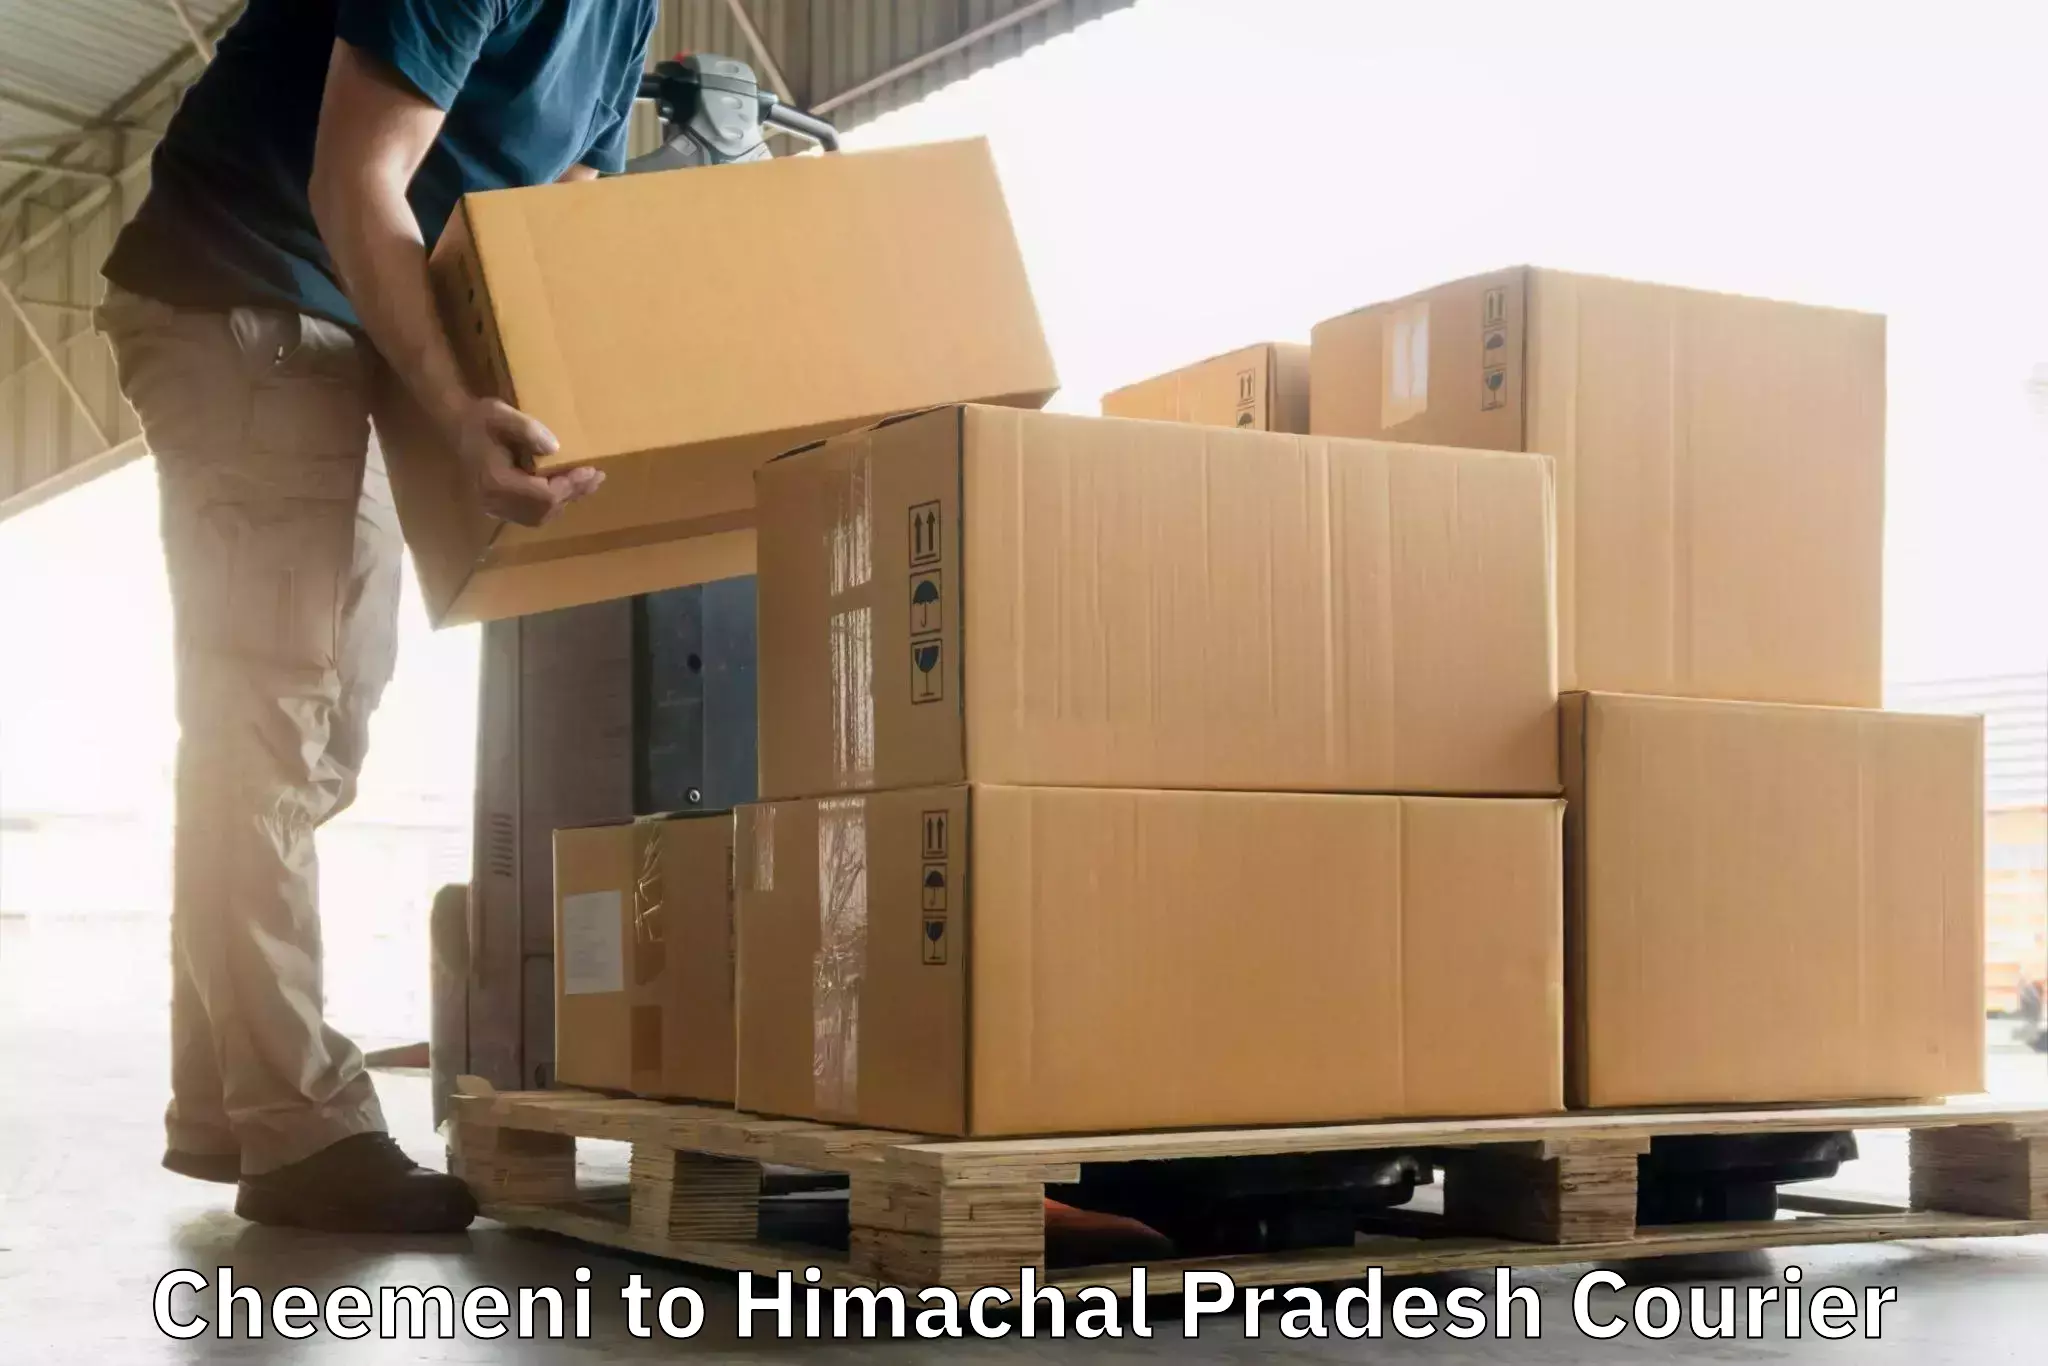 Express delivery solutions Cheemeni to Himachal Pradesh